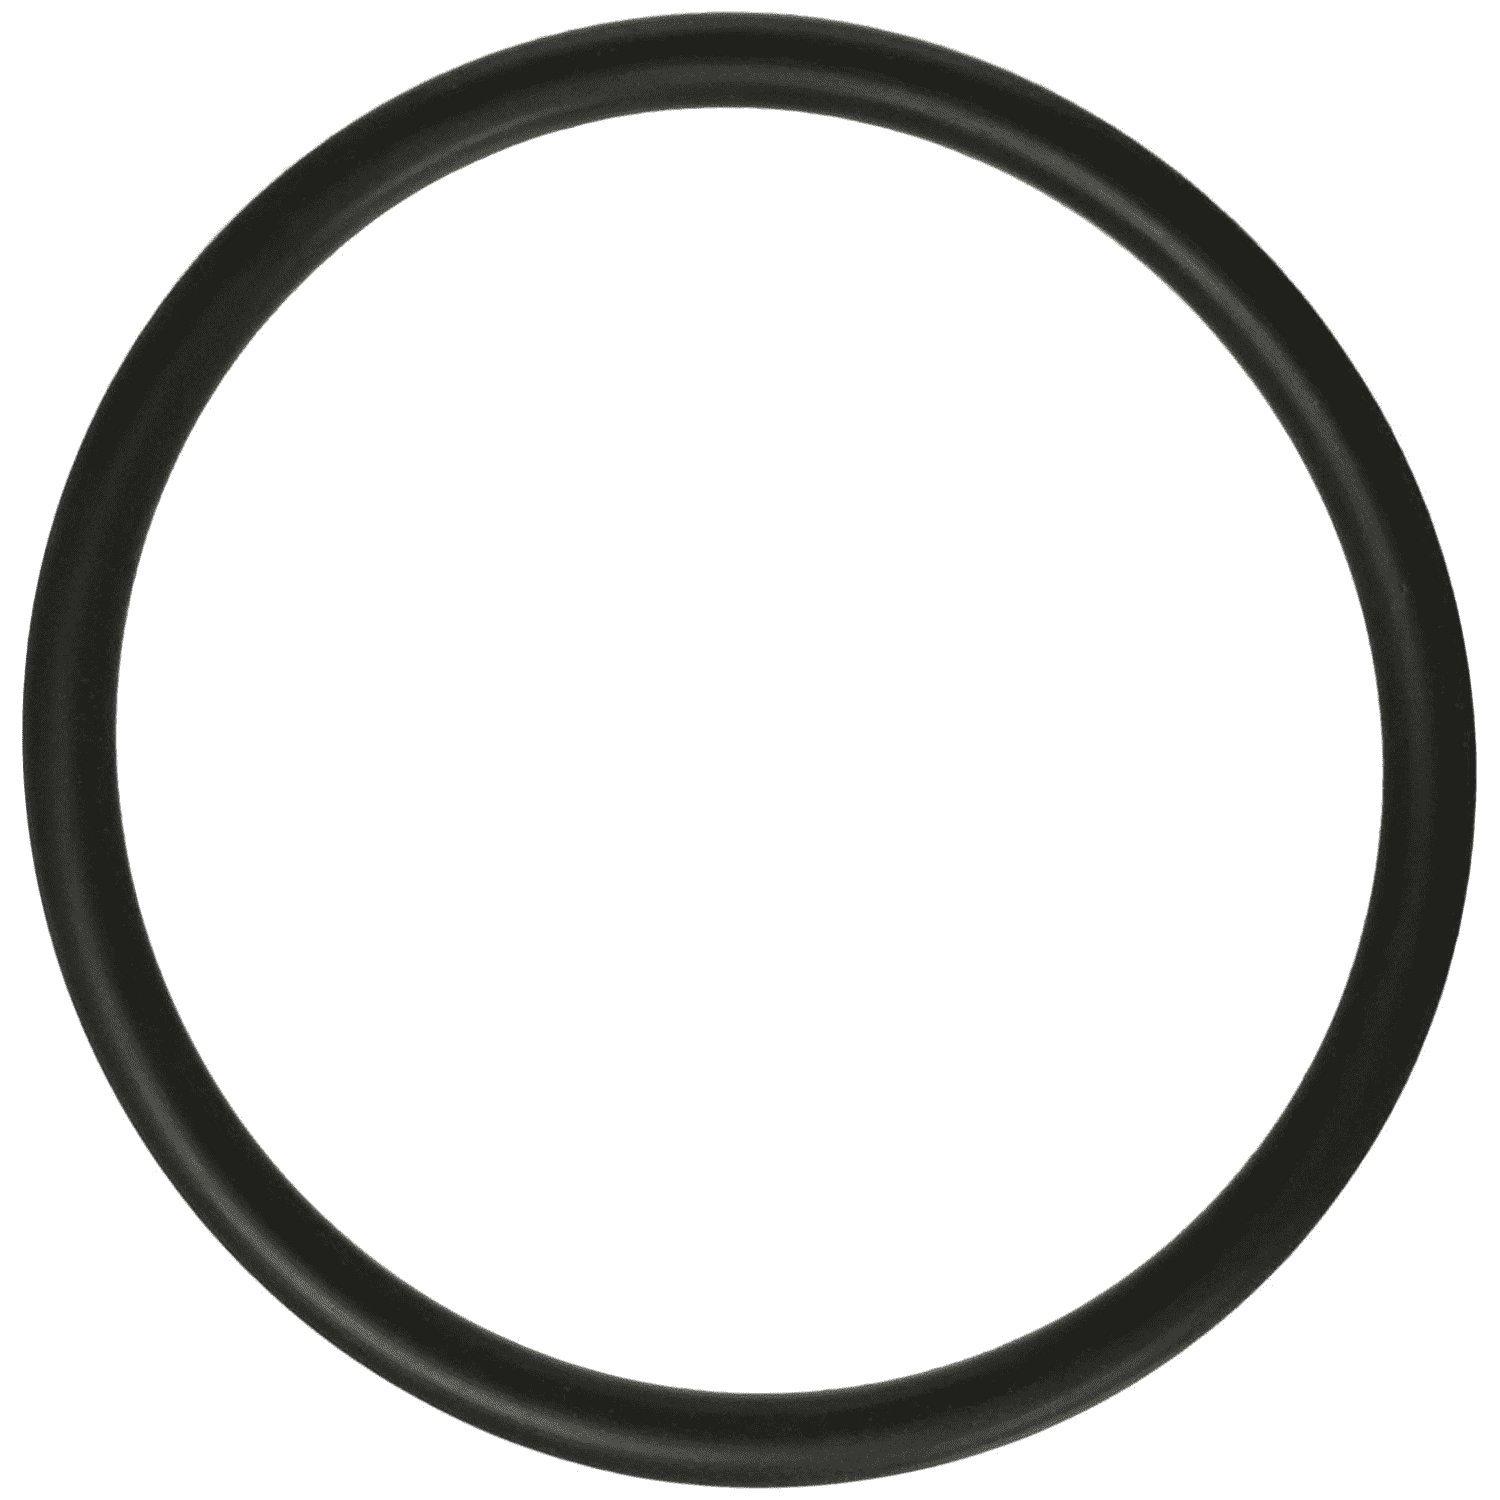 Hydro Seal Parco O-ring - 2.725in. Id